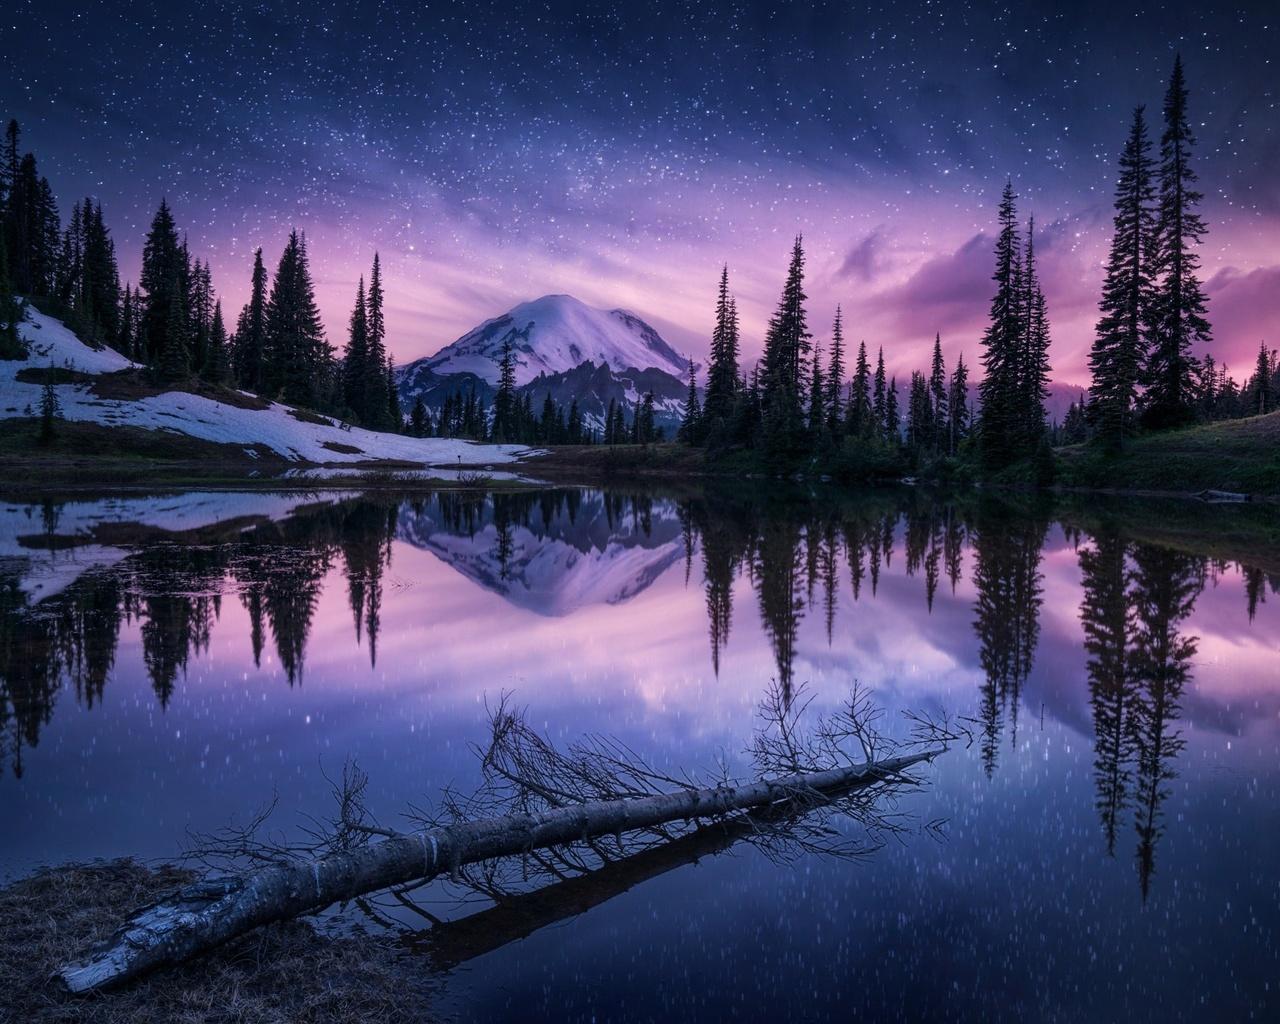 A mountain reflected in the water at night - 1280x1024